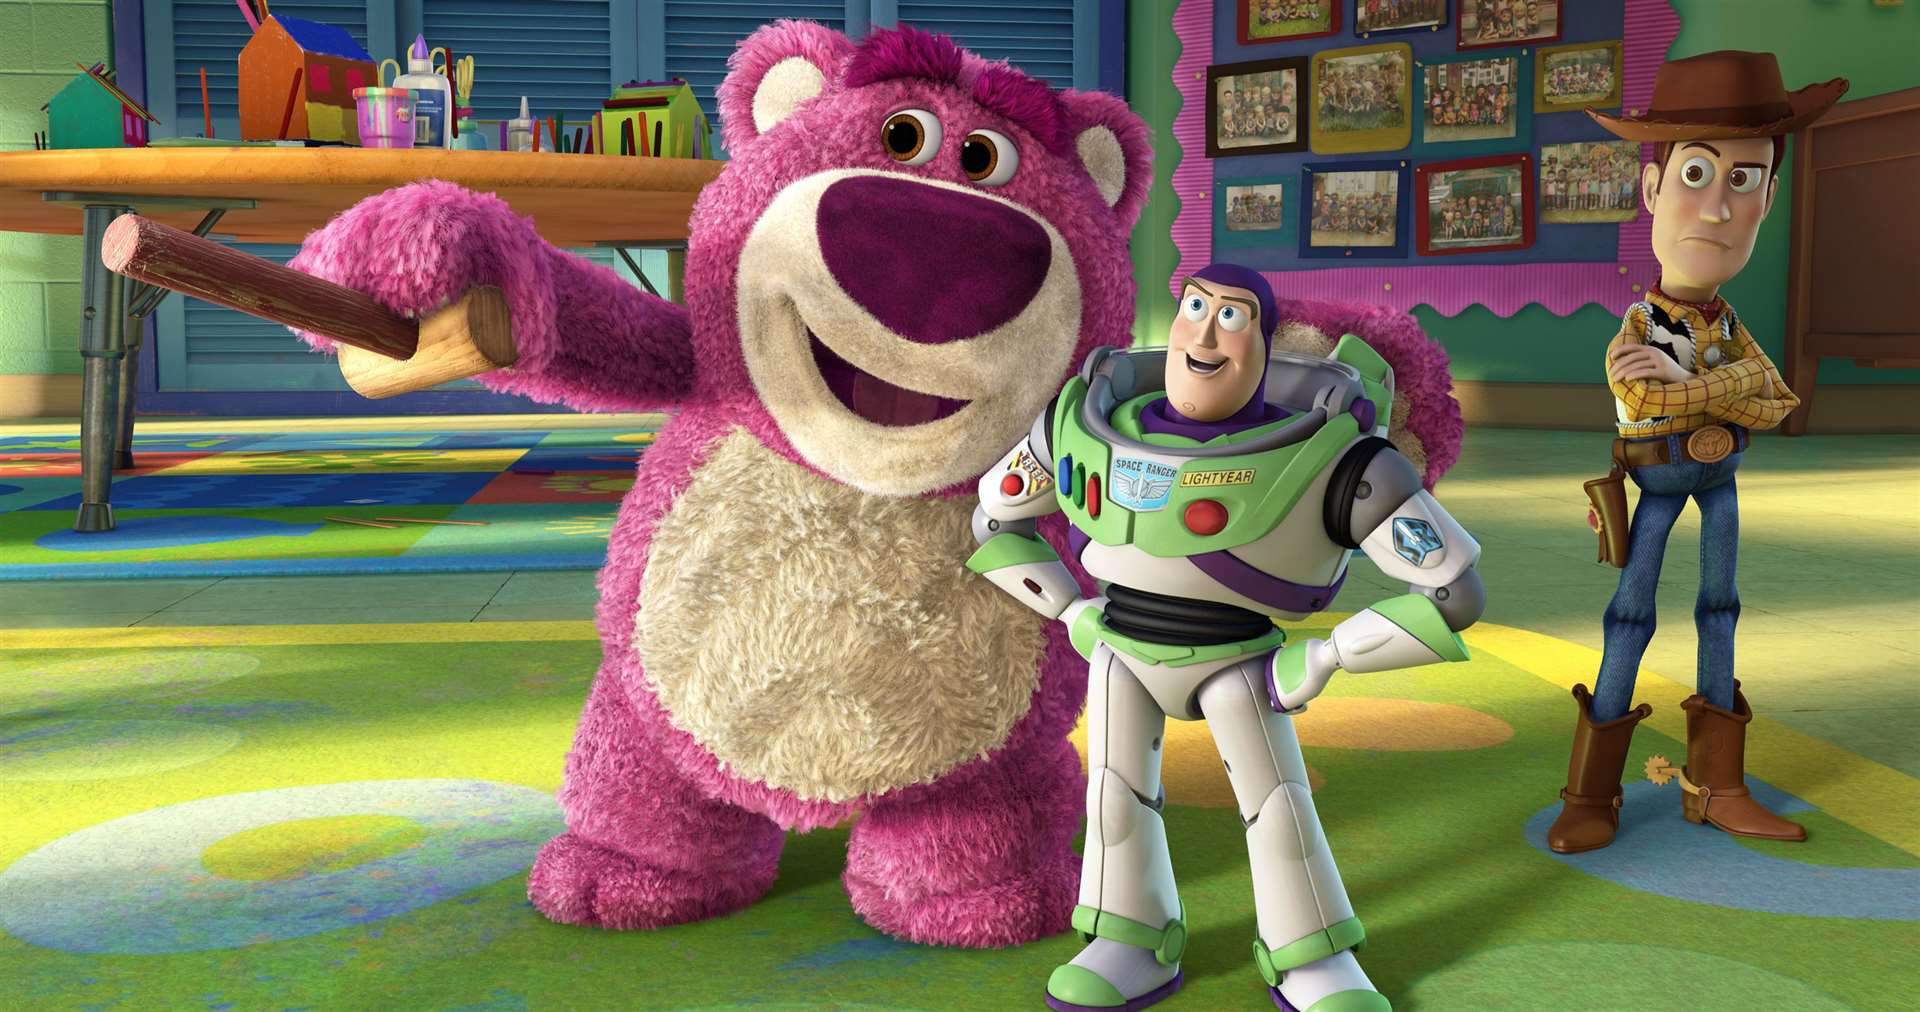 Lots-O-Huggin' Bear, Buzz Lightyear and Woody in Toy Story 3 Picture: Disney/Pixar